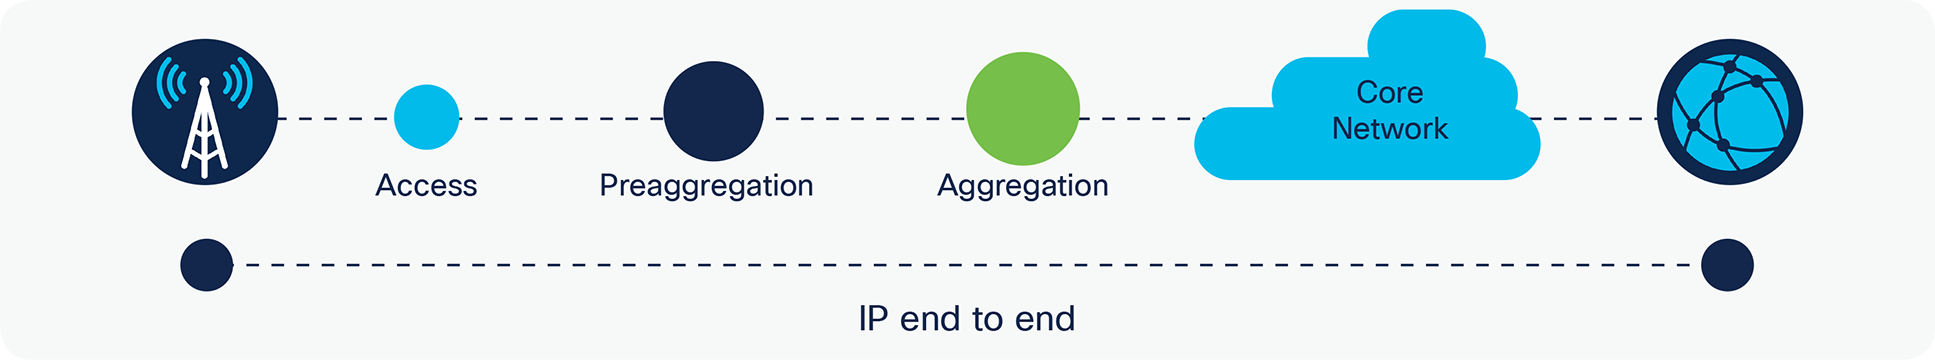 Simplify your network with IP end to end